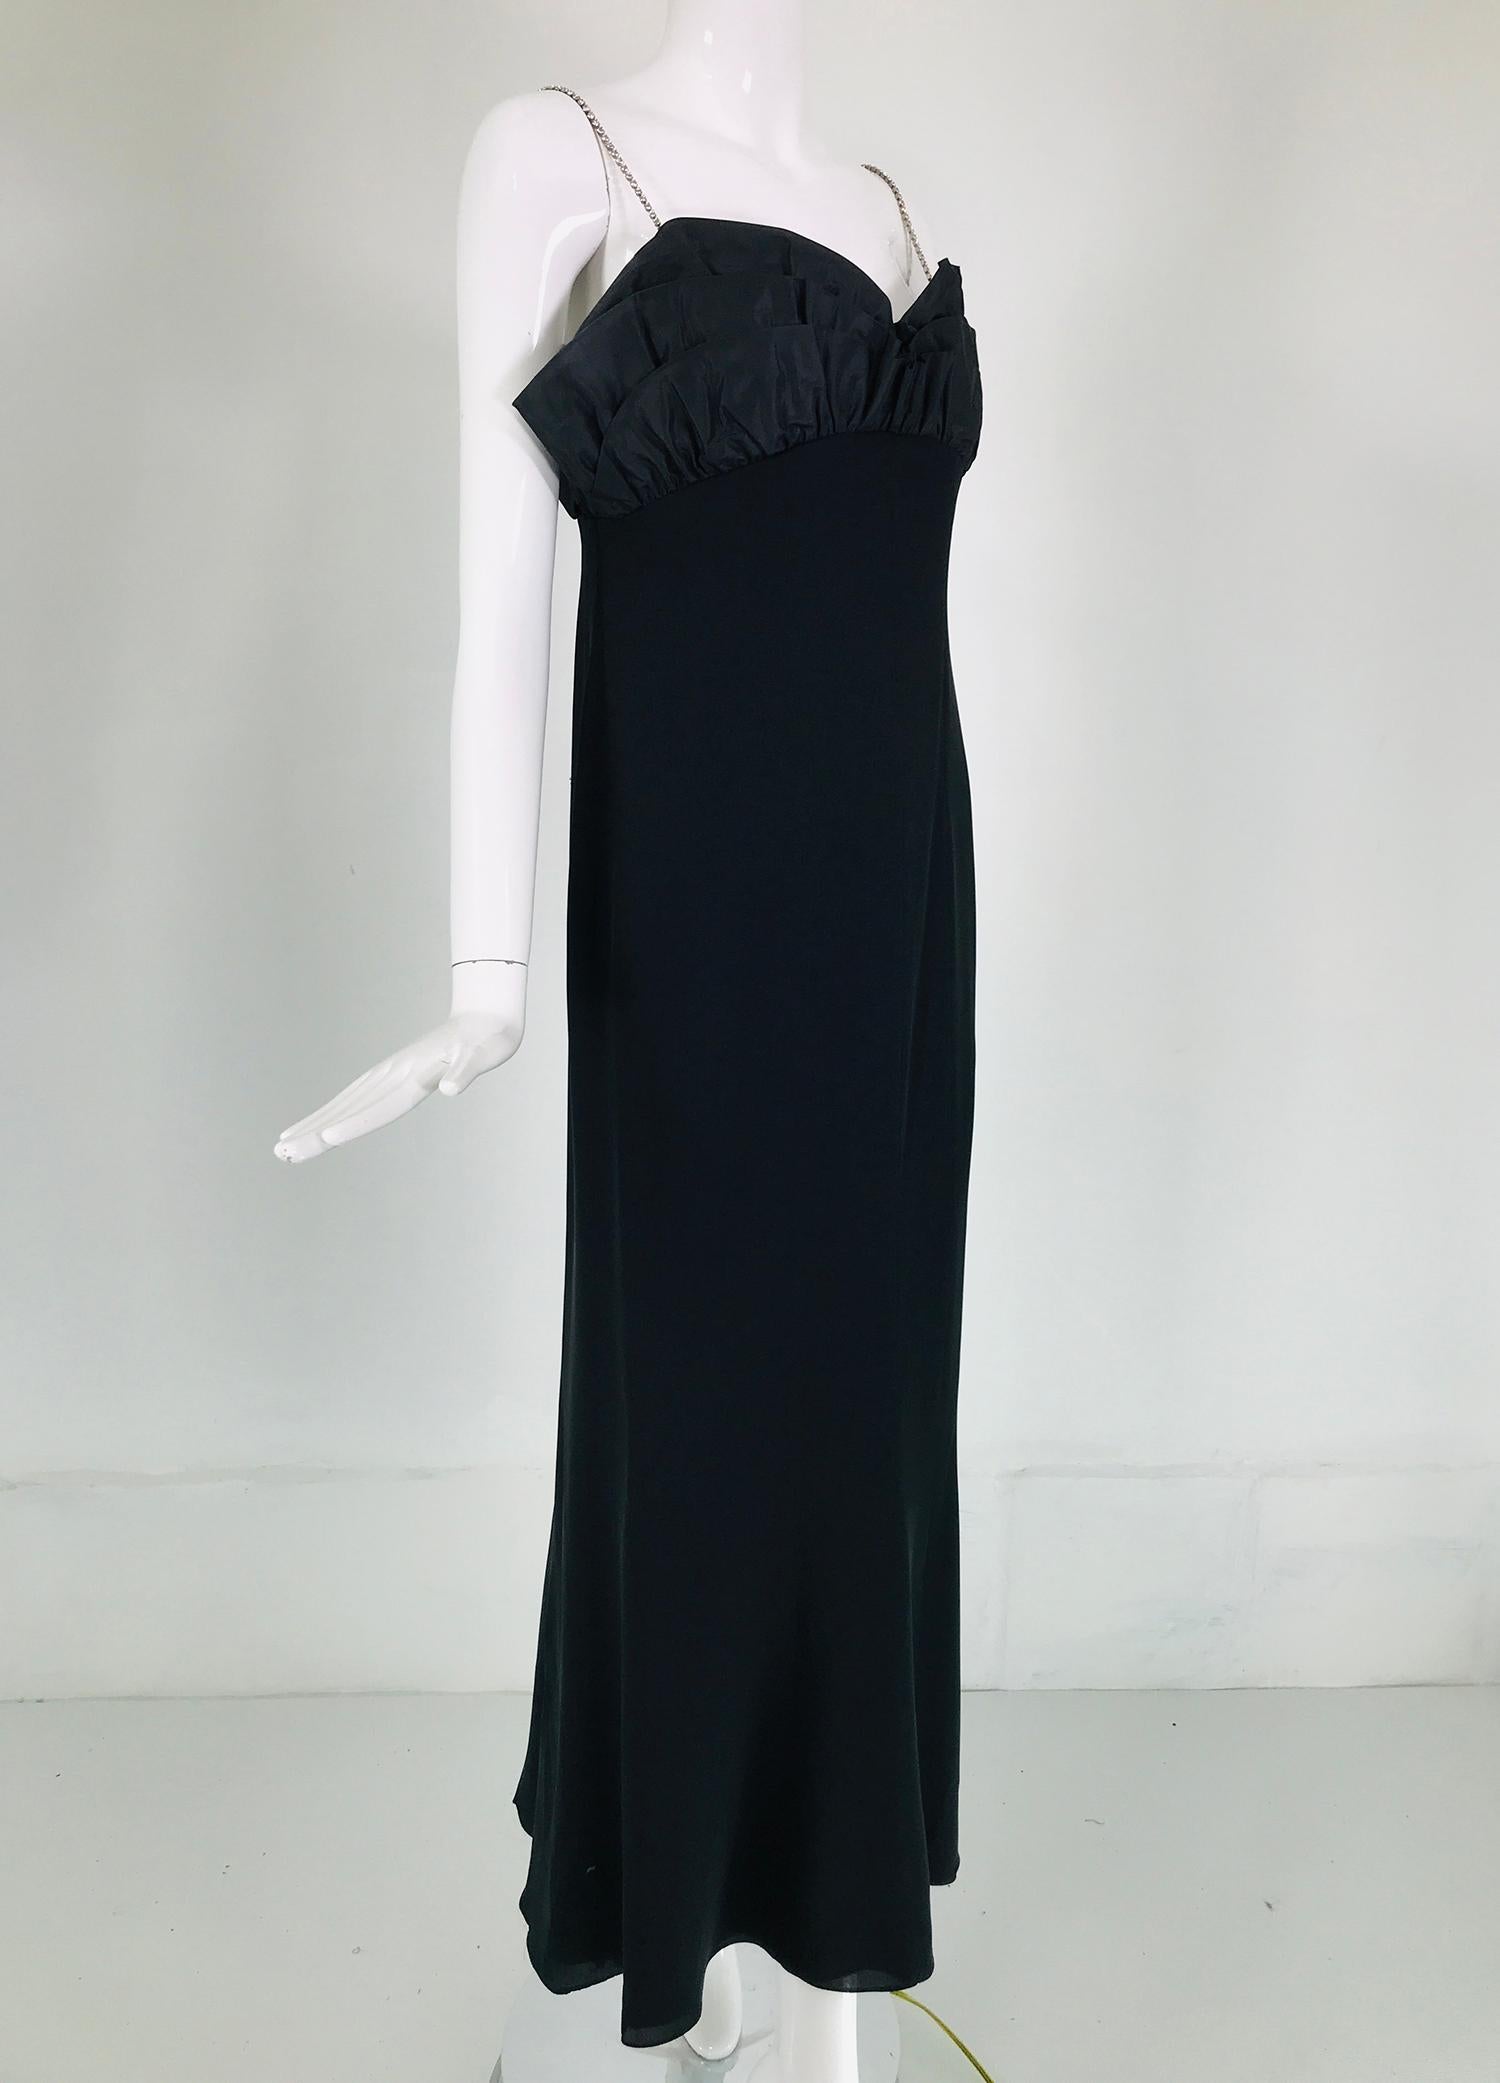 Escada black silk evening dress with rhinestone shoulder straps and a silk taffeta ruffle bodice. This beautiful dress is perfect for any special event. Glittery crystal rhinestones make amazing shoulder straps, the bodice is horizontally pleated